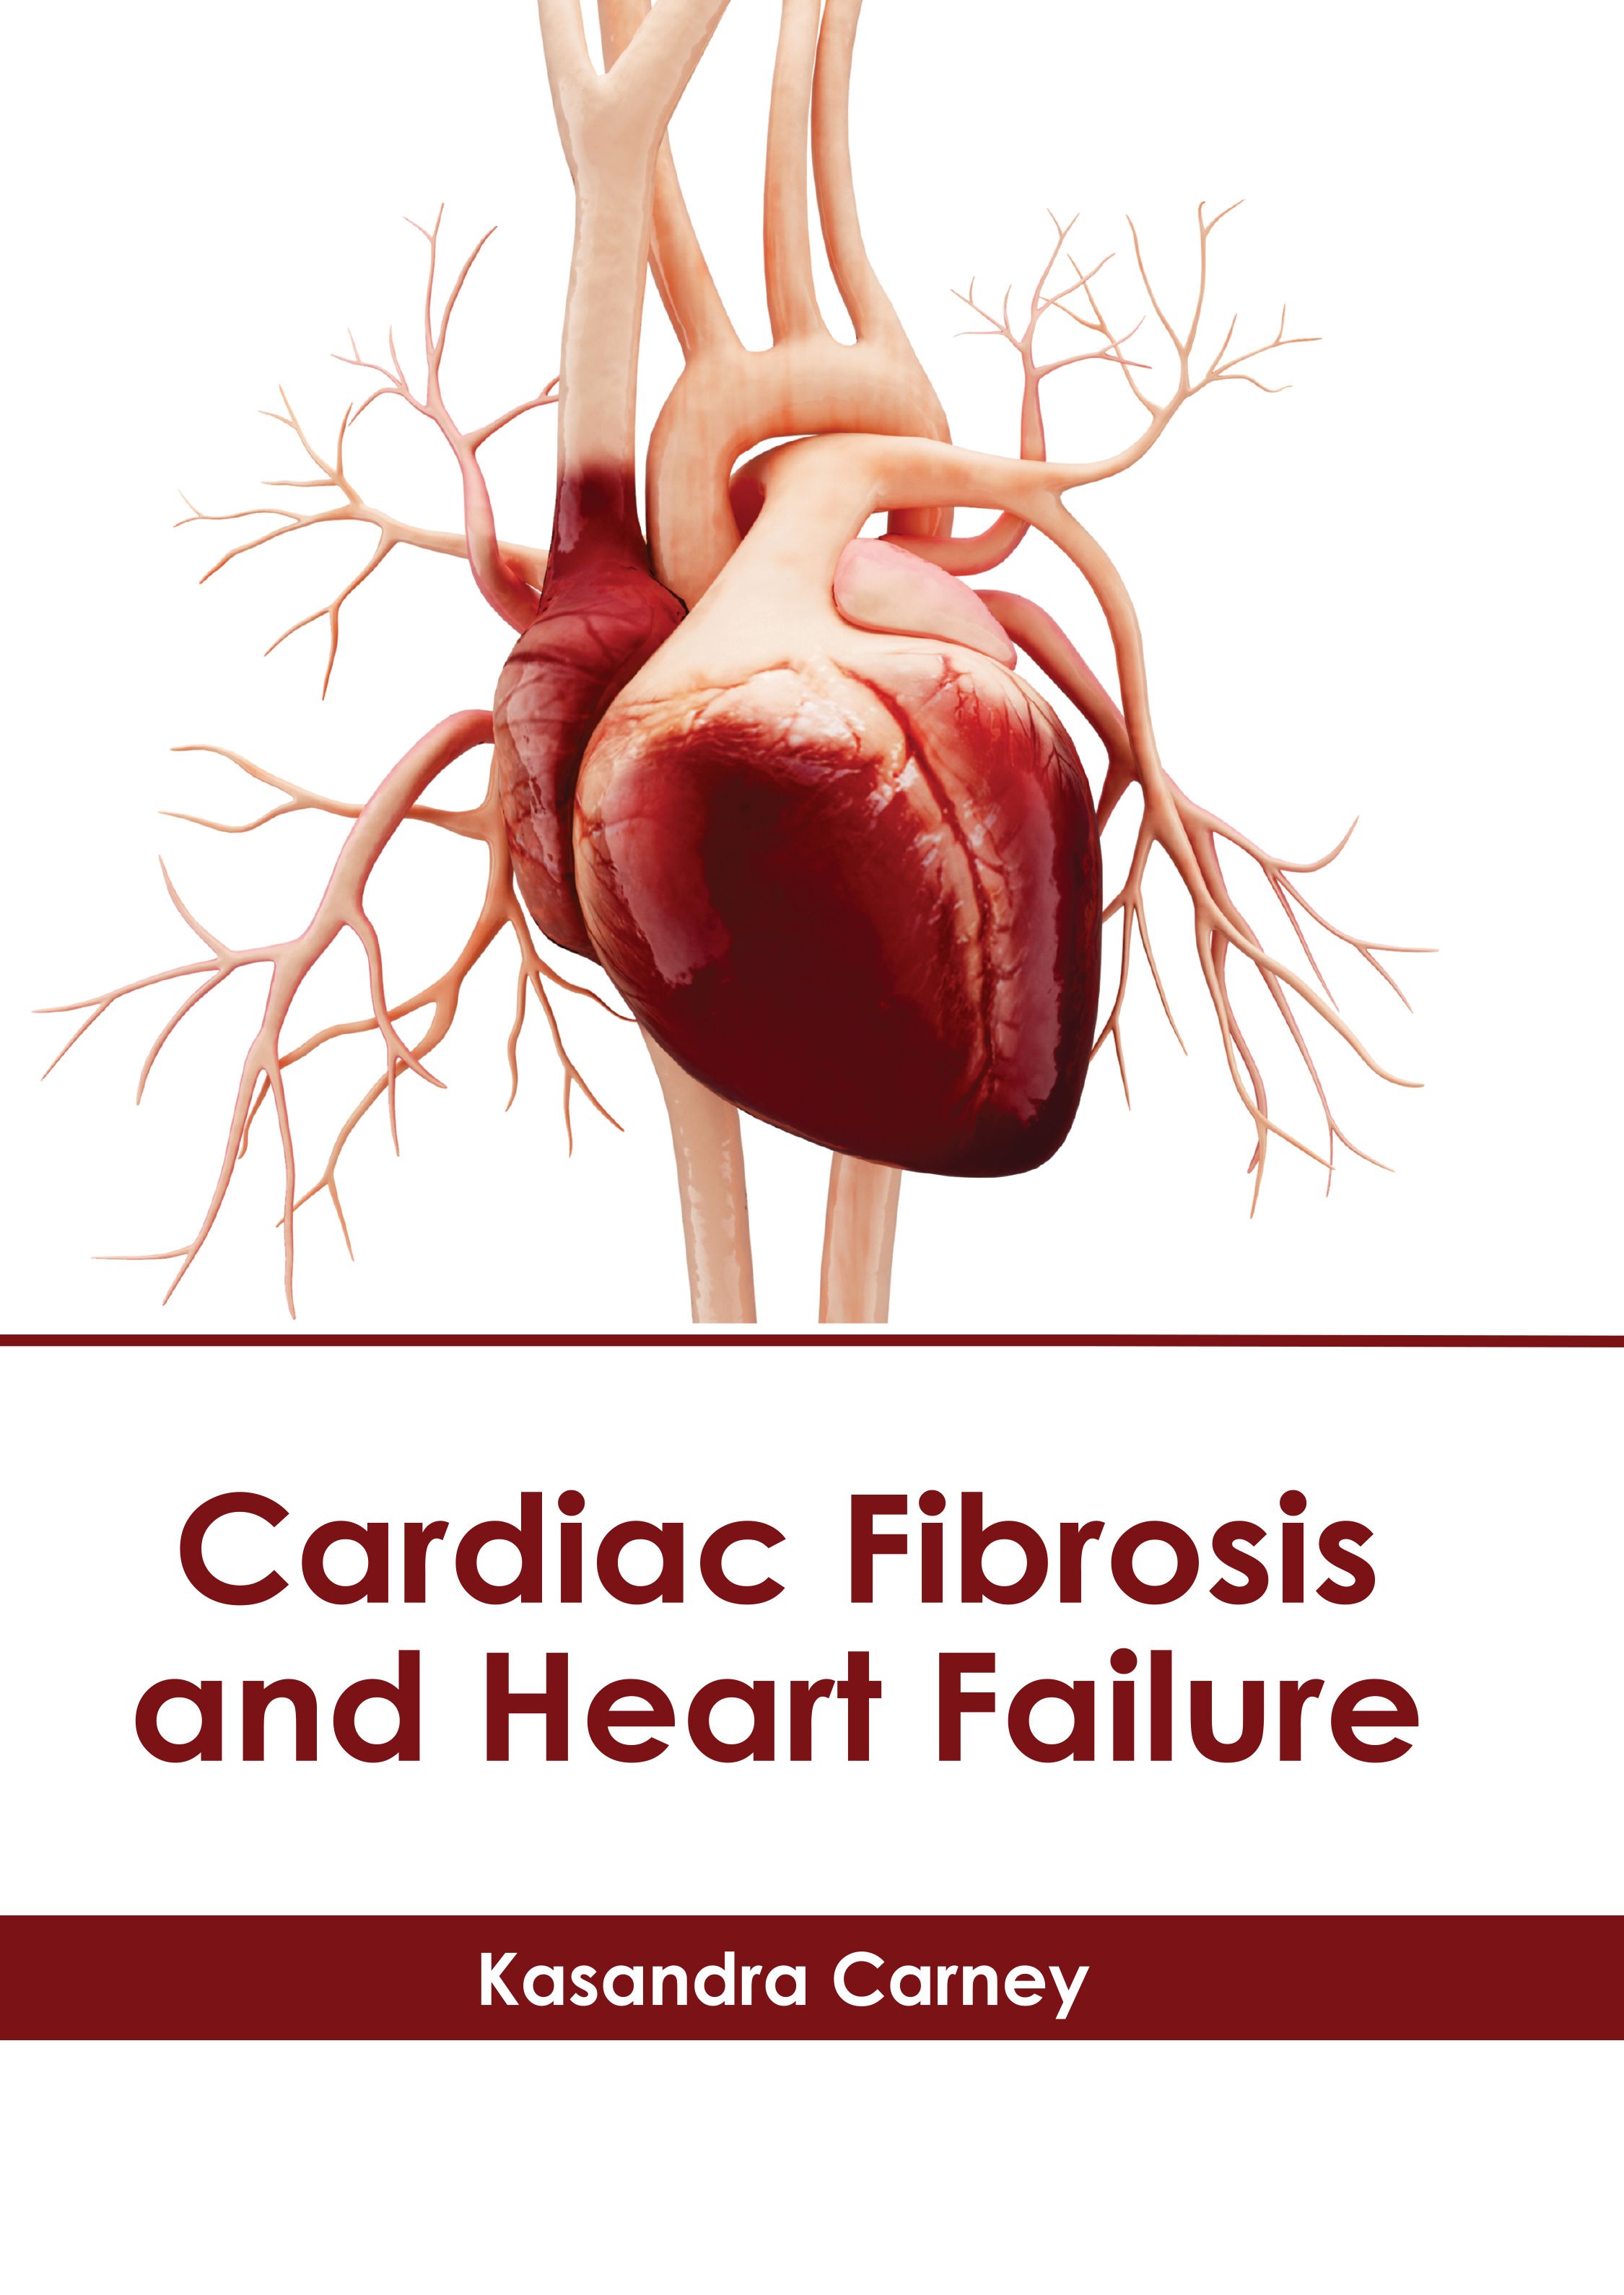 

exclusive-publishers/american-medical-publishers/cardiac-fibrosis-and-heart-failure-9781639279609